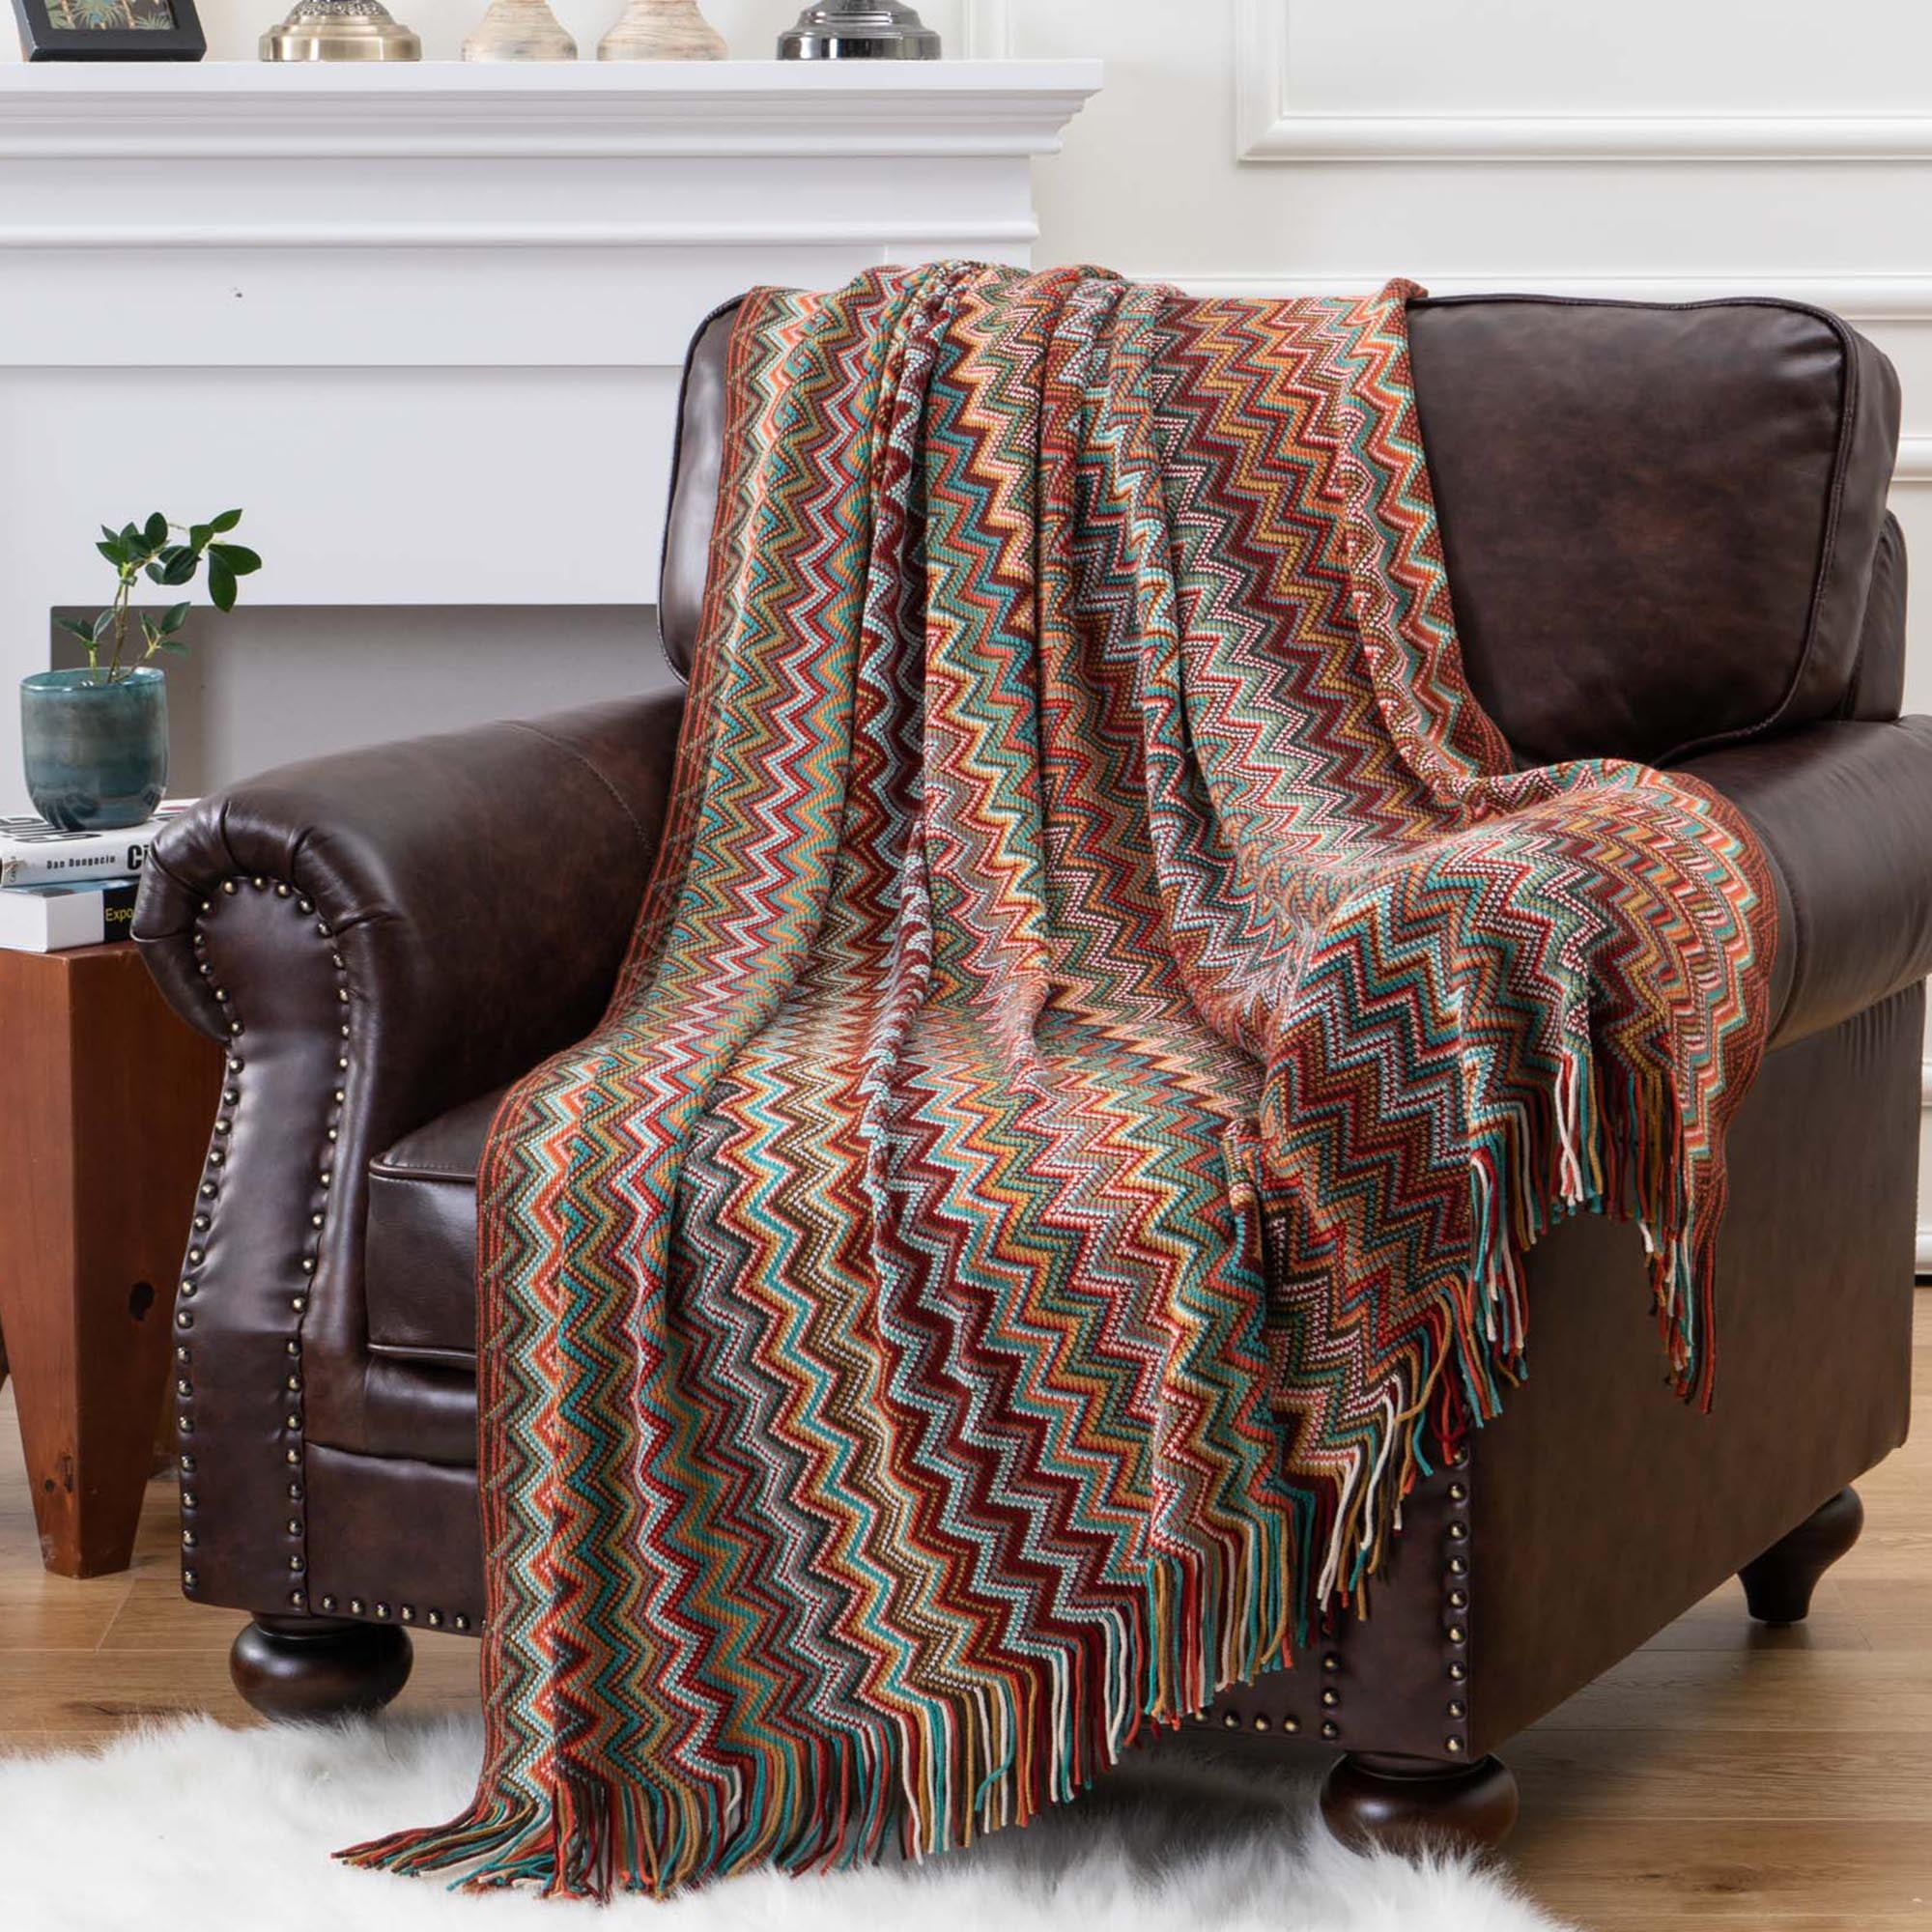 grua Impulso celestial Battilo Bohemian Knit Throw Blanket with Fringe Extra Large Super Soft  Striped Wavy Geometric Blanket for Couch, Sofa, Bed, Chair 80" x 50" (Dust  Red) - Walmart.com